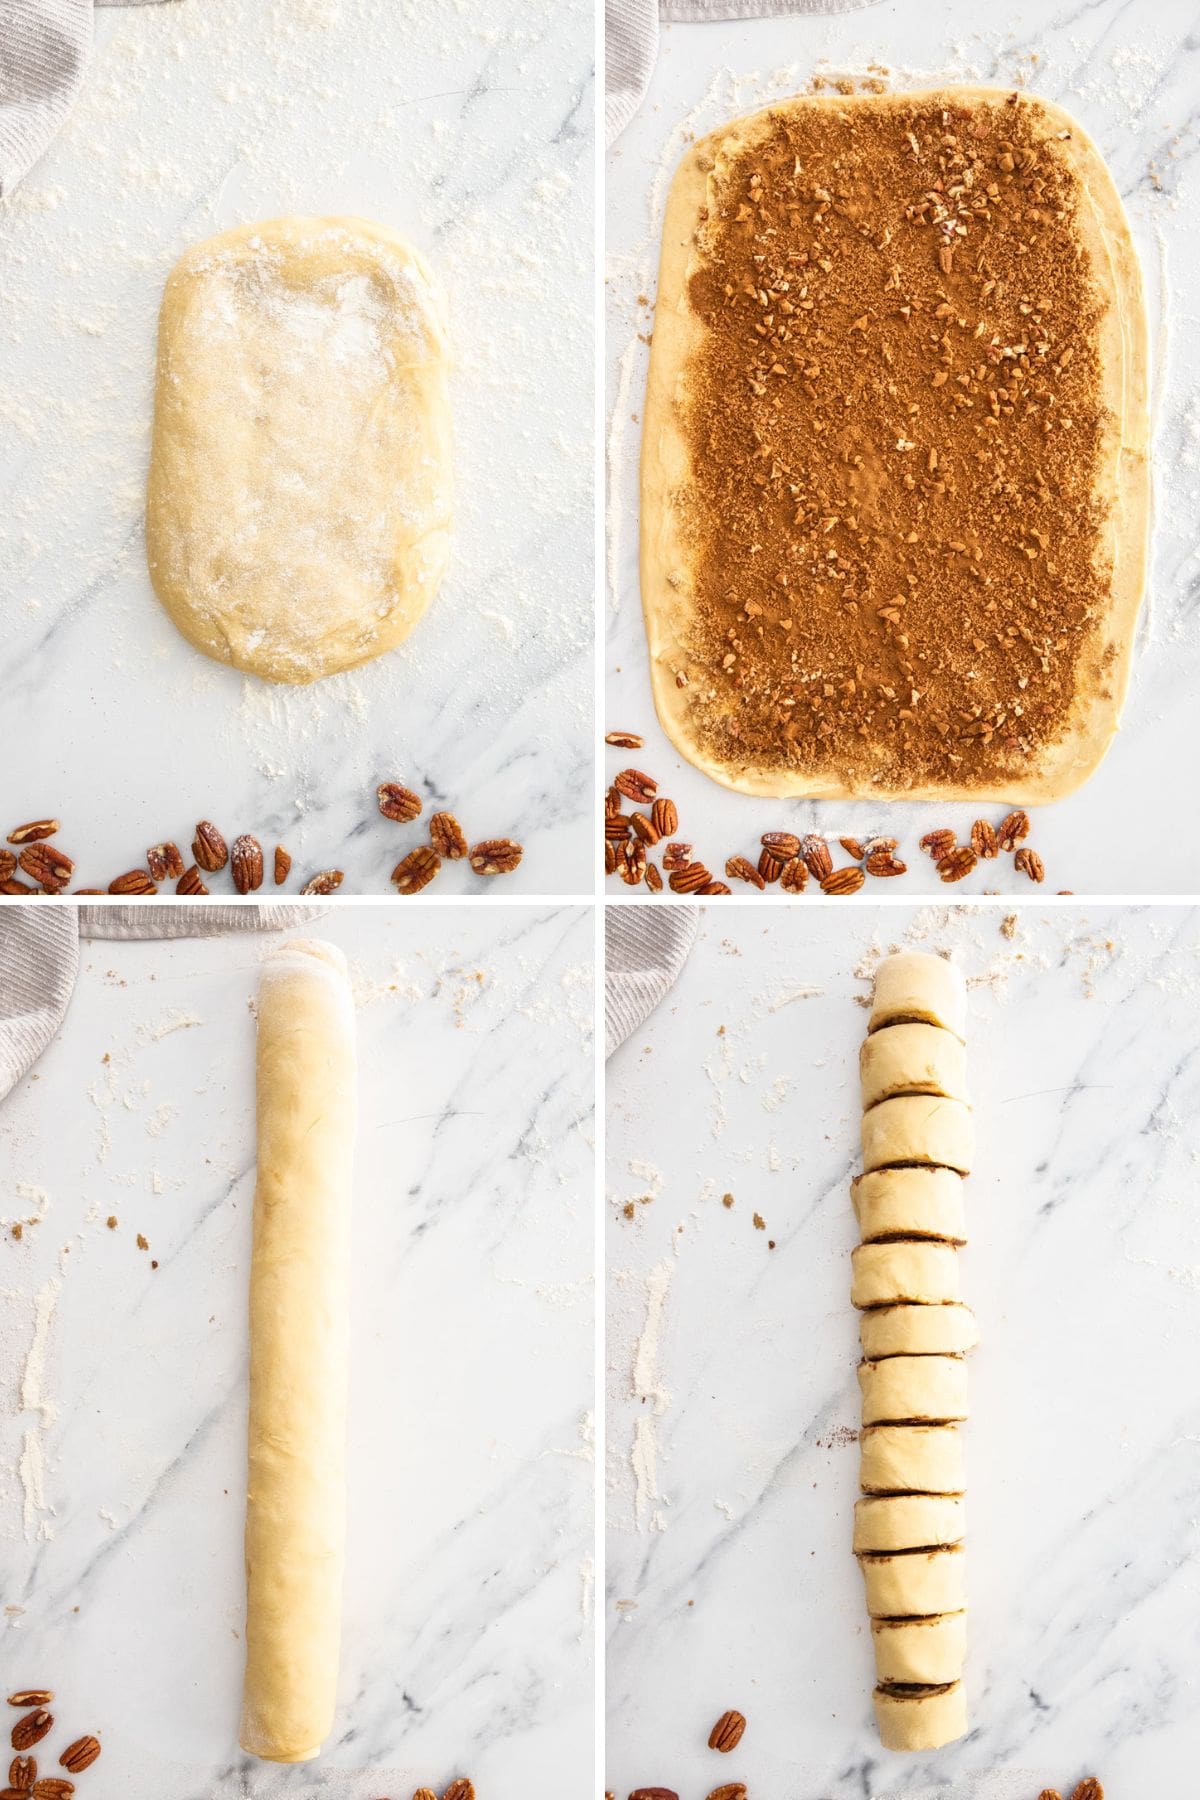 4 photos showing the process of making sticky buns.